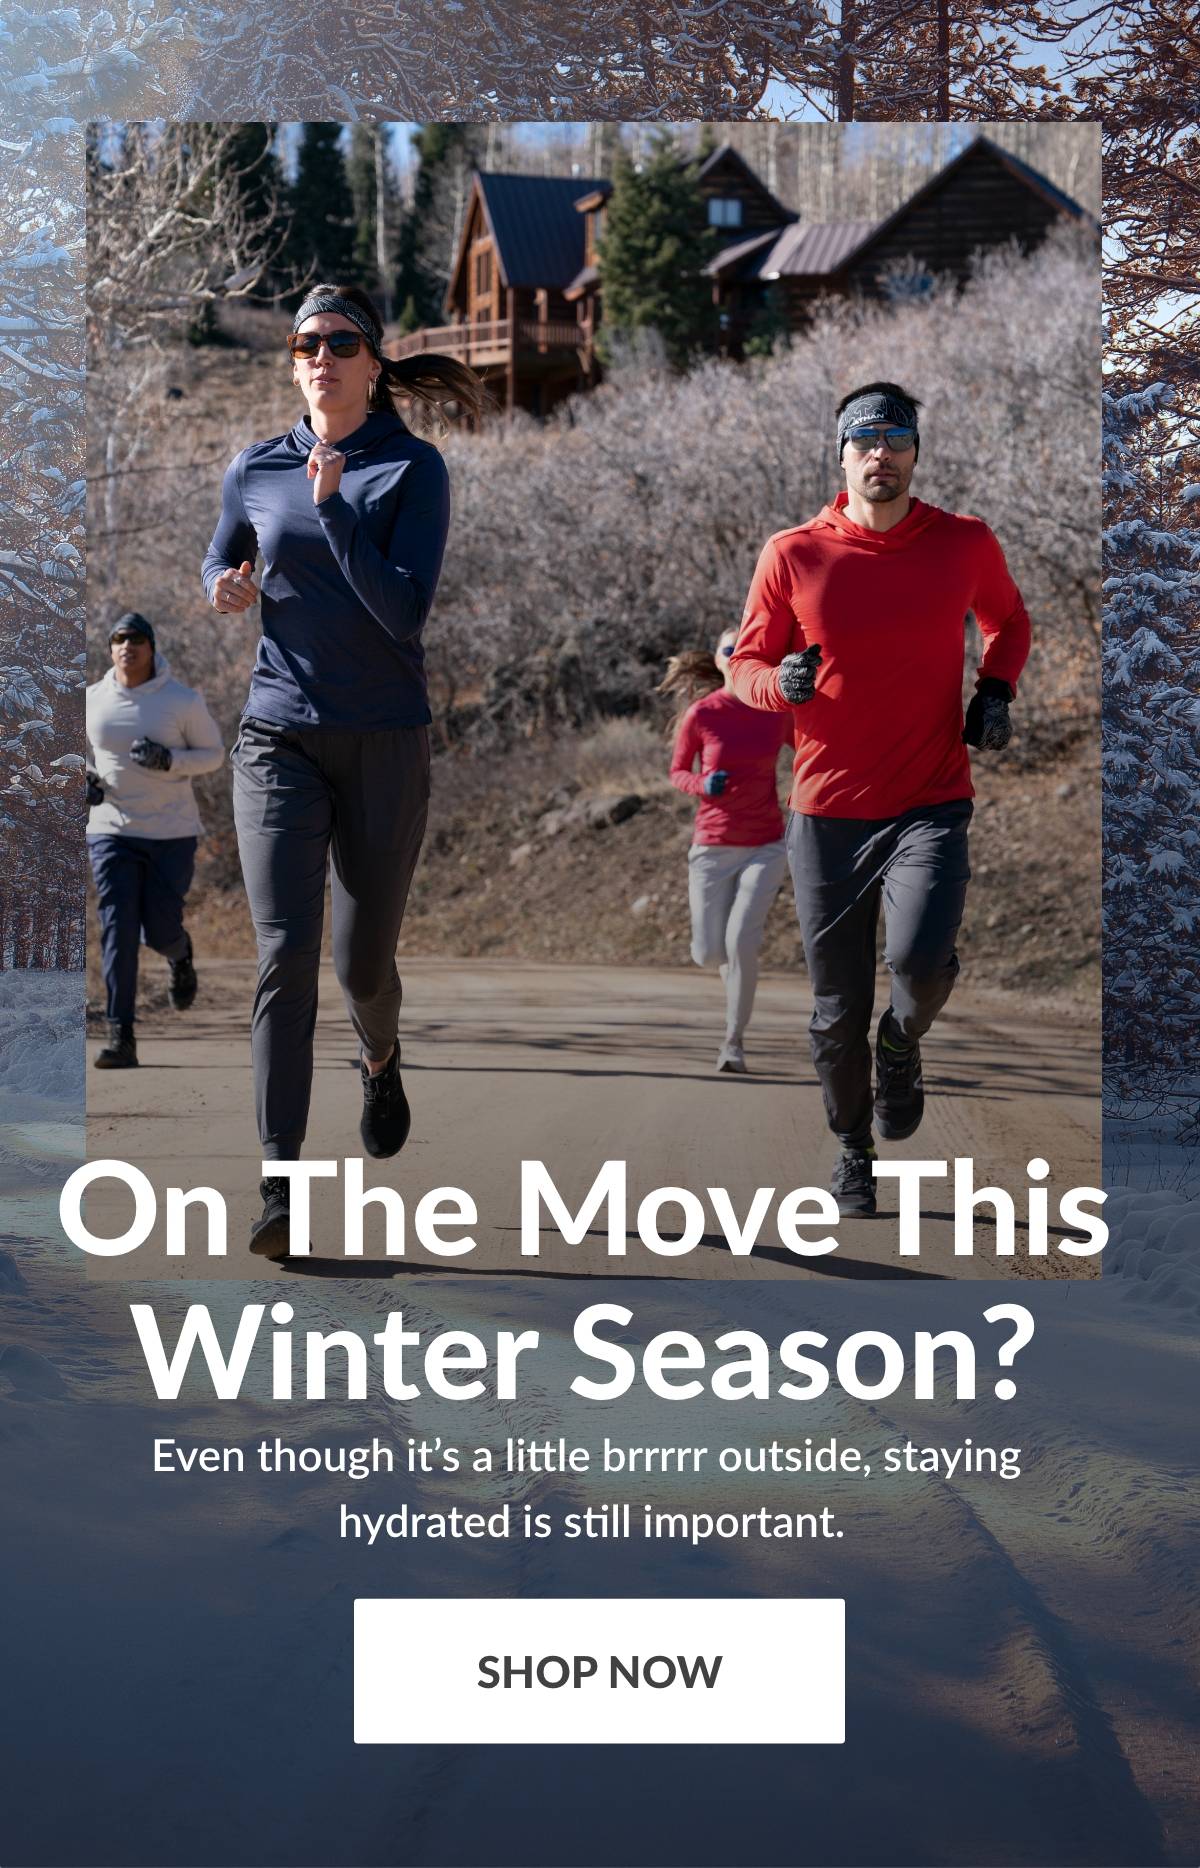 On the move this winter season? Even though it's a little brrrrr outside, staying hydrated is still important. SHOP NOW